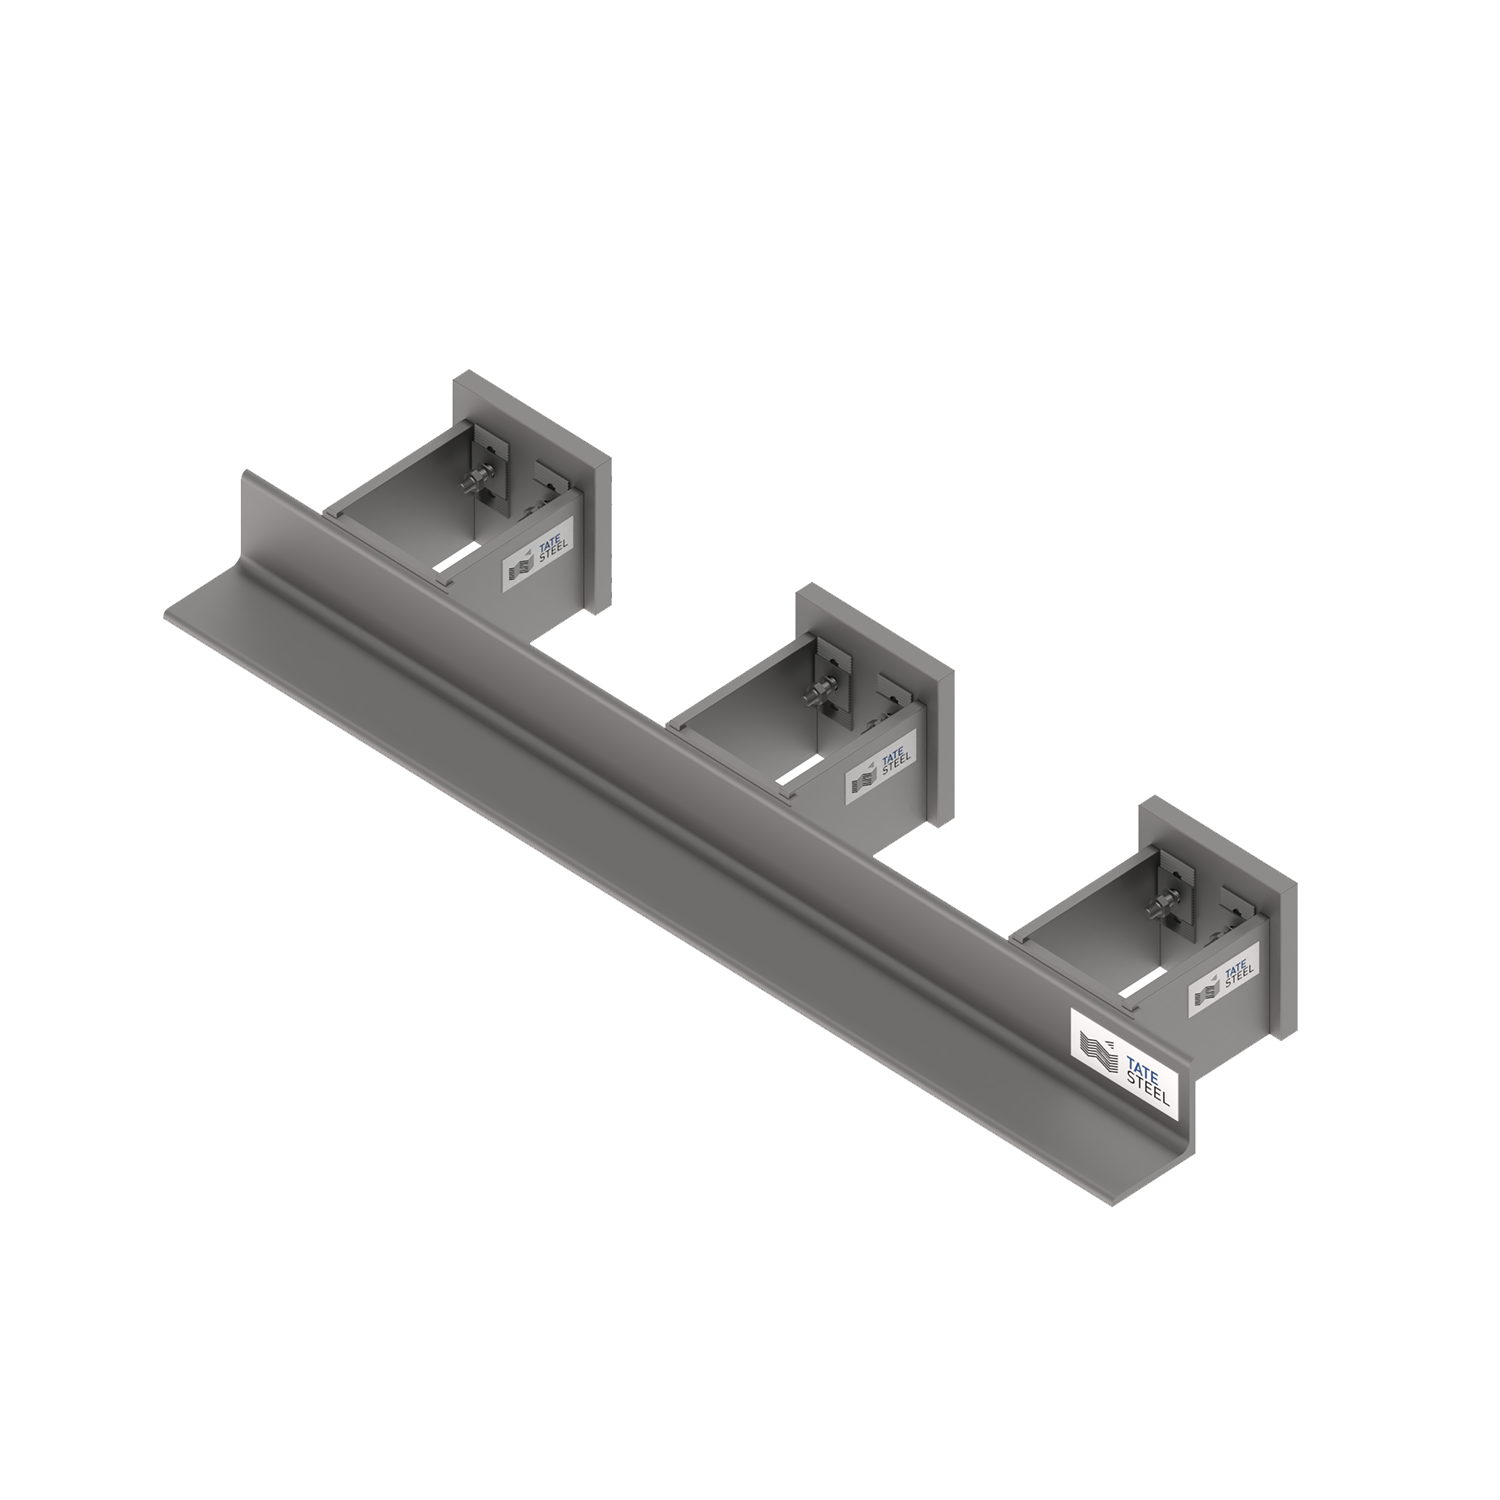 02_Masonry Support Wide Cavity Floor Level System - 3D Render_Bracket Only.png